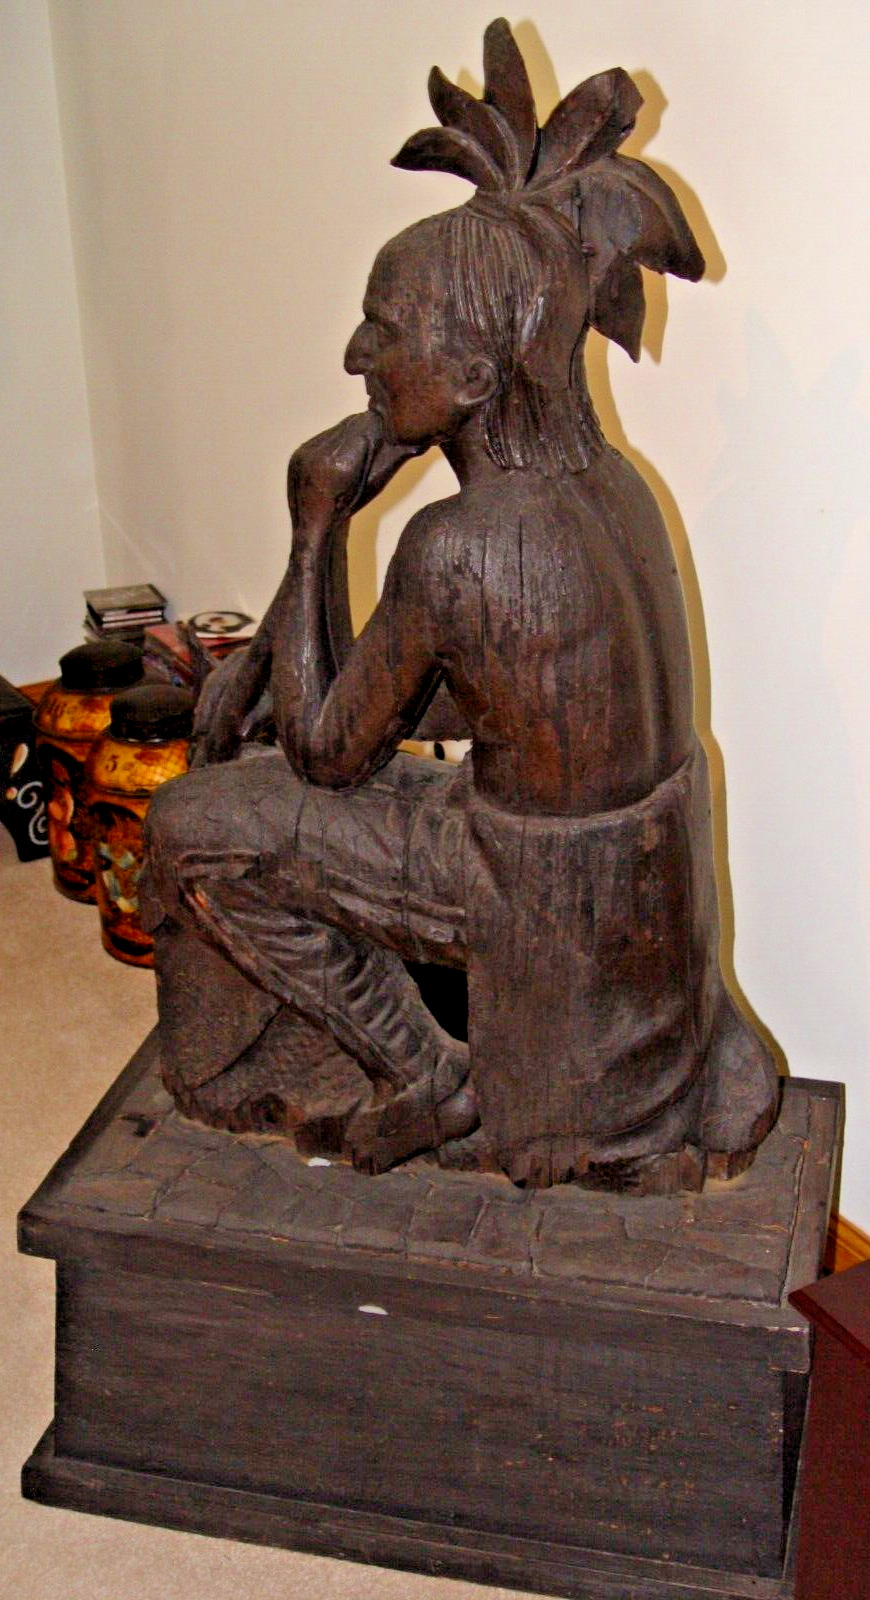 ANTIQUE CA. 1870 CIGAR STORE INDIAN TRADE SIGN DISPLAY FIGURE, RARE SITTING FORM